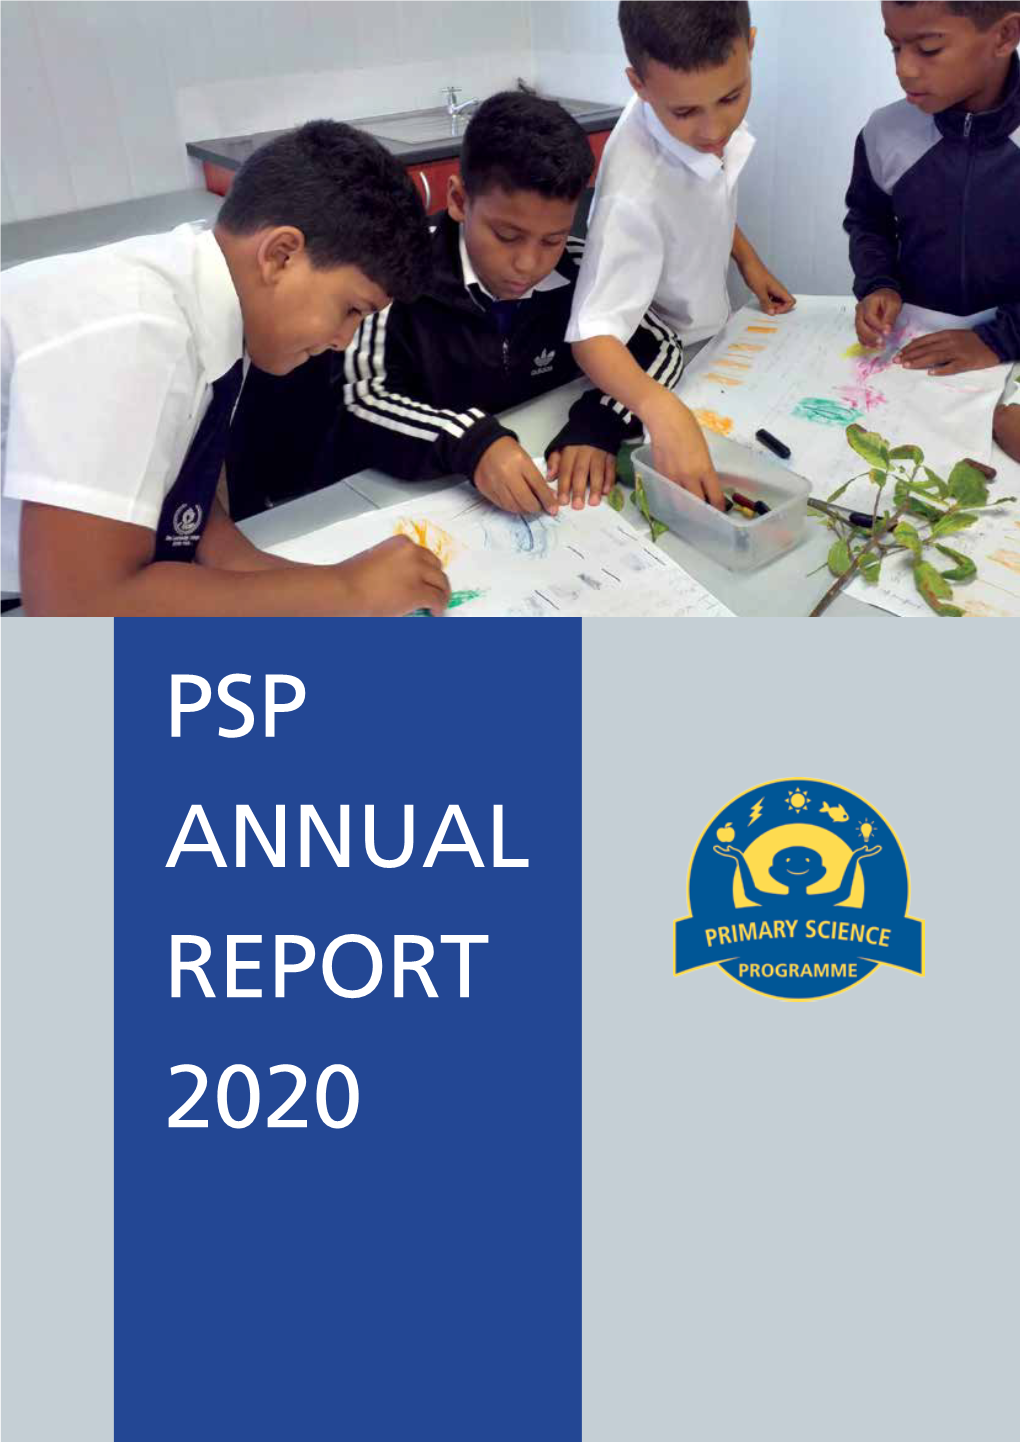 PSP Annual Report 2020